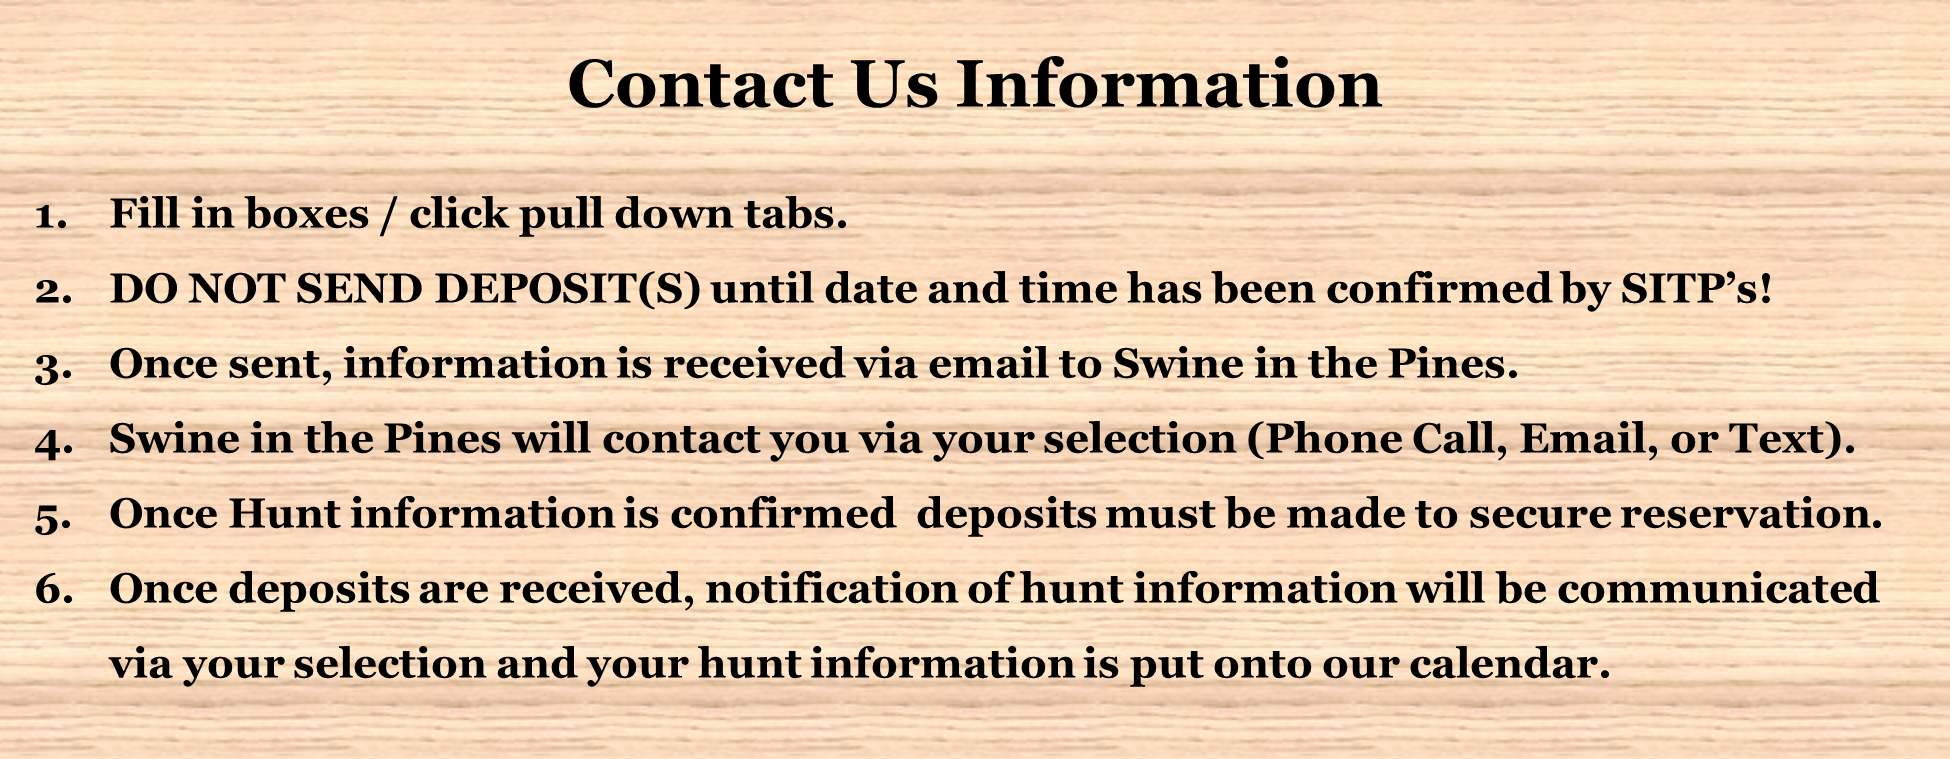 Contact Us at Swine In The Pines